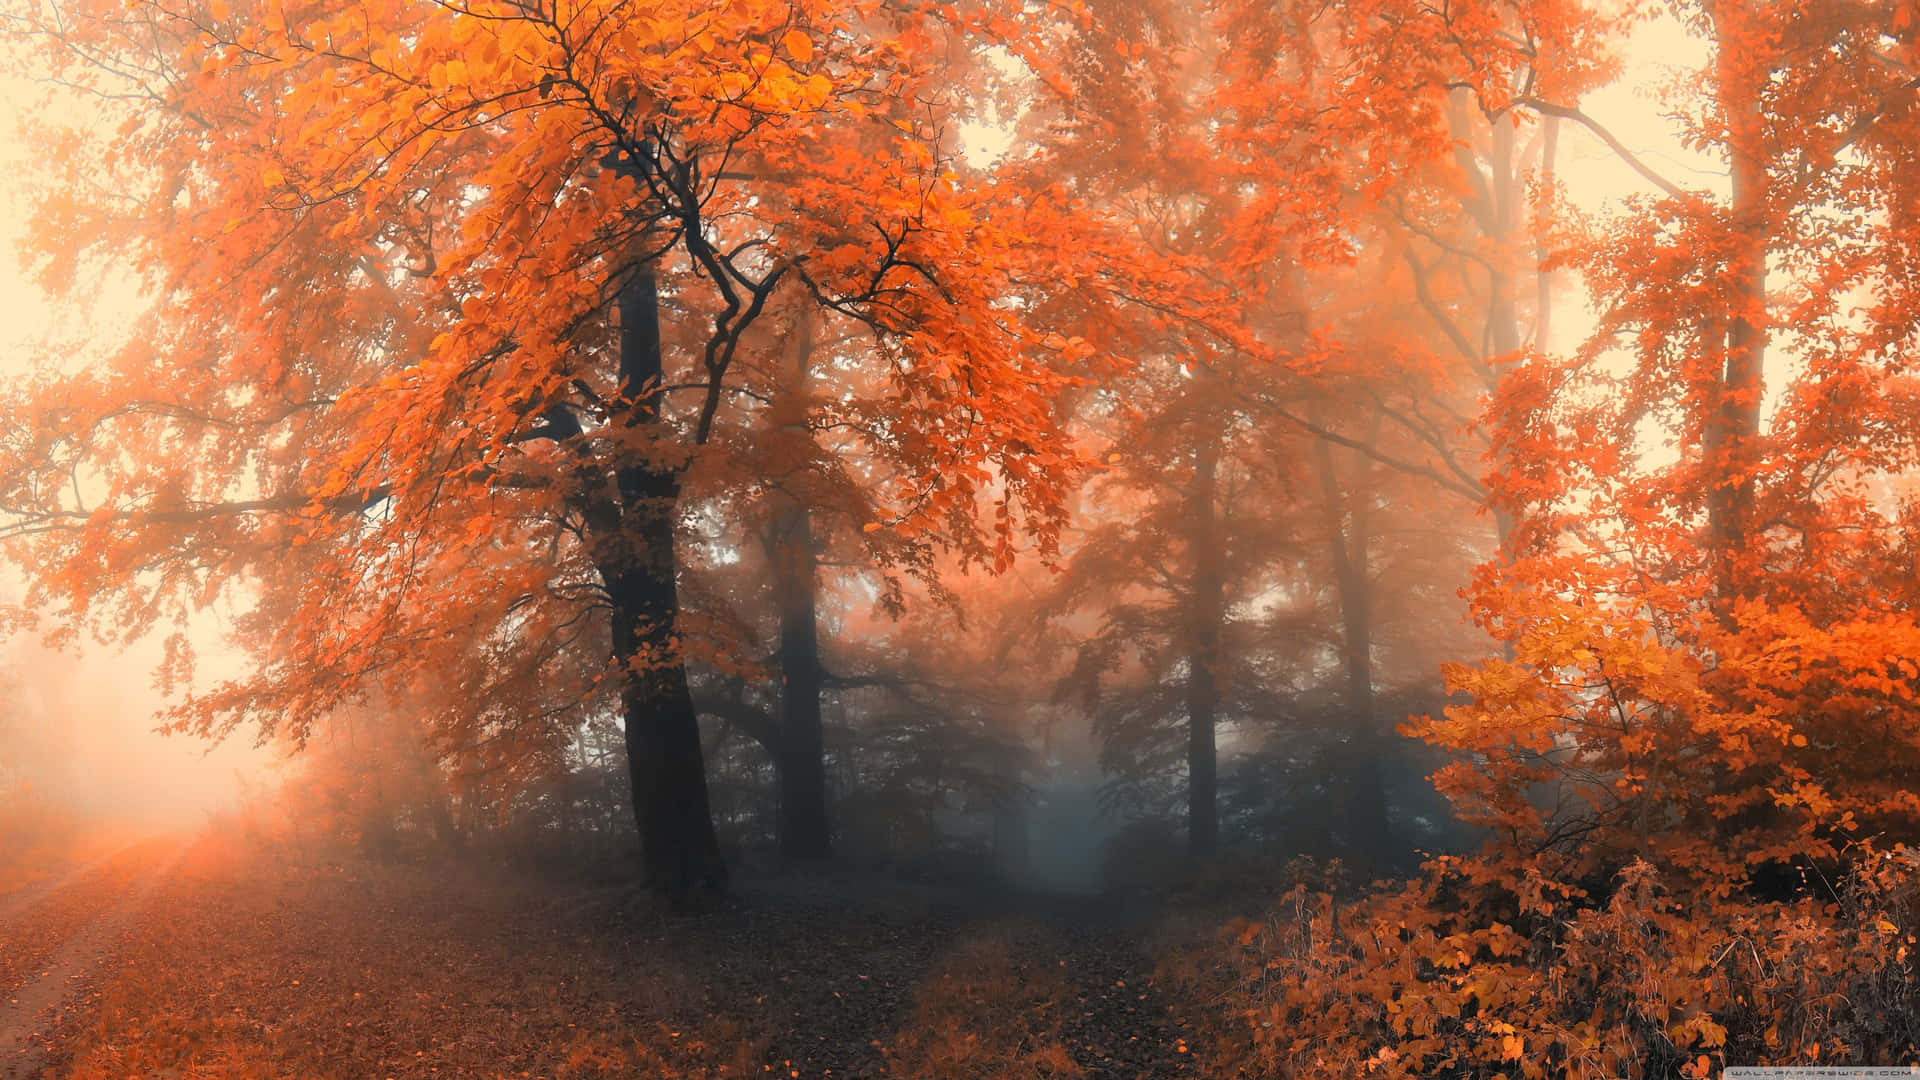 Take in the beauty of Autumn with this breathtaking 3840 x 2160 photograph. Wallpaper